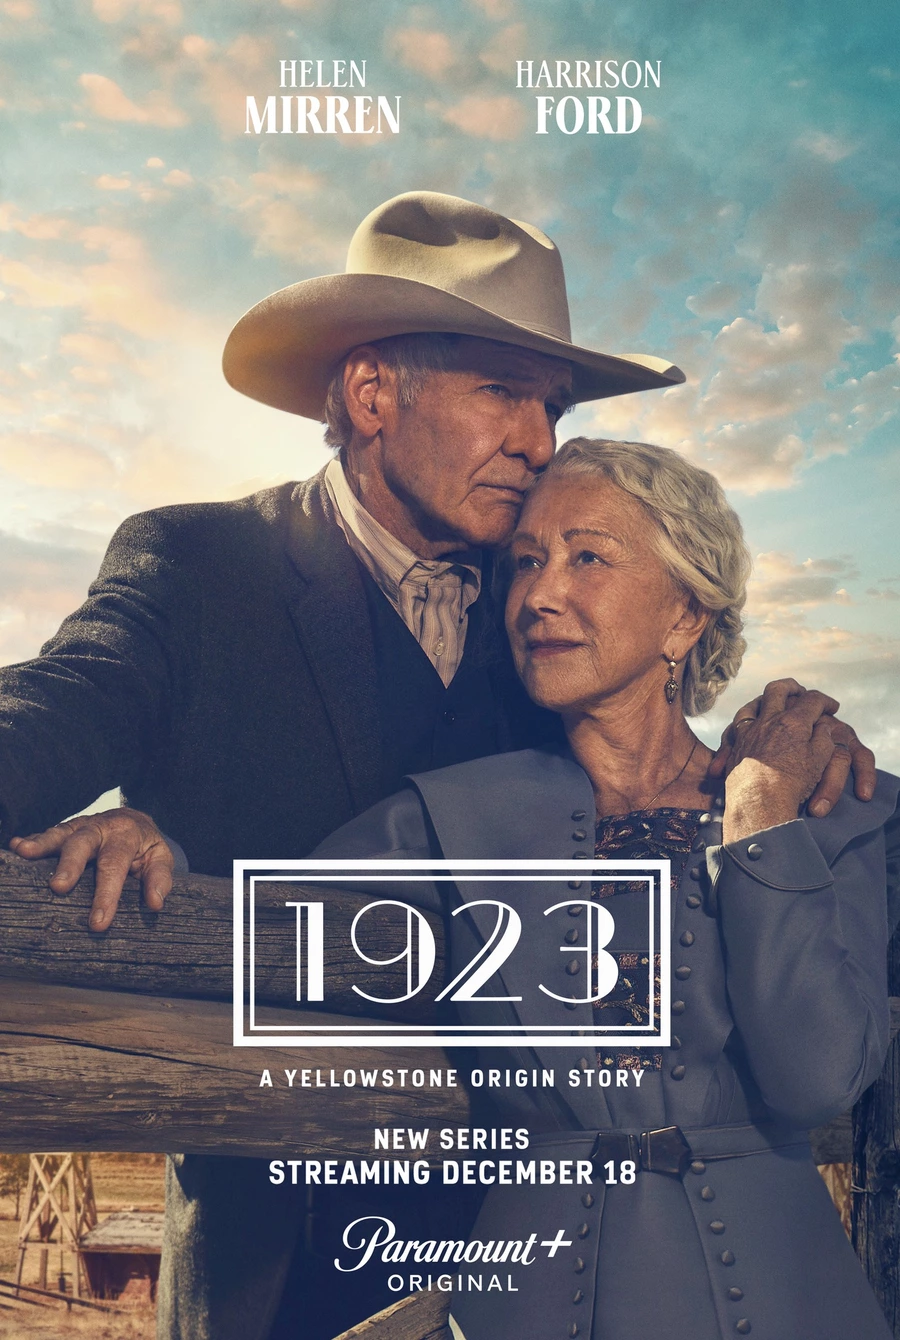 Harrison Ford and Helen Mirren on the poster for the series «1923», which will premiere on December 18 on Paramount +.. This is a prequel to the neo-western «Yellowstone» and a sequel to «1883», which will tell about the life of the second and third generation of the Dutton family, ranchers in Montana. Much has changed since James and Margaret Dutton came to this area 40 years ago. Their 30 and 40-year-old children and 20-year-old grandchildren are facing the challenges of a new century: the spread of mechanization, the strengthening of local government, and competition for resources with other ranchers. Now the family is headed by their uncle and his wife.